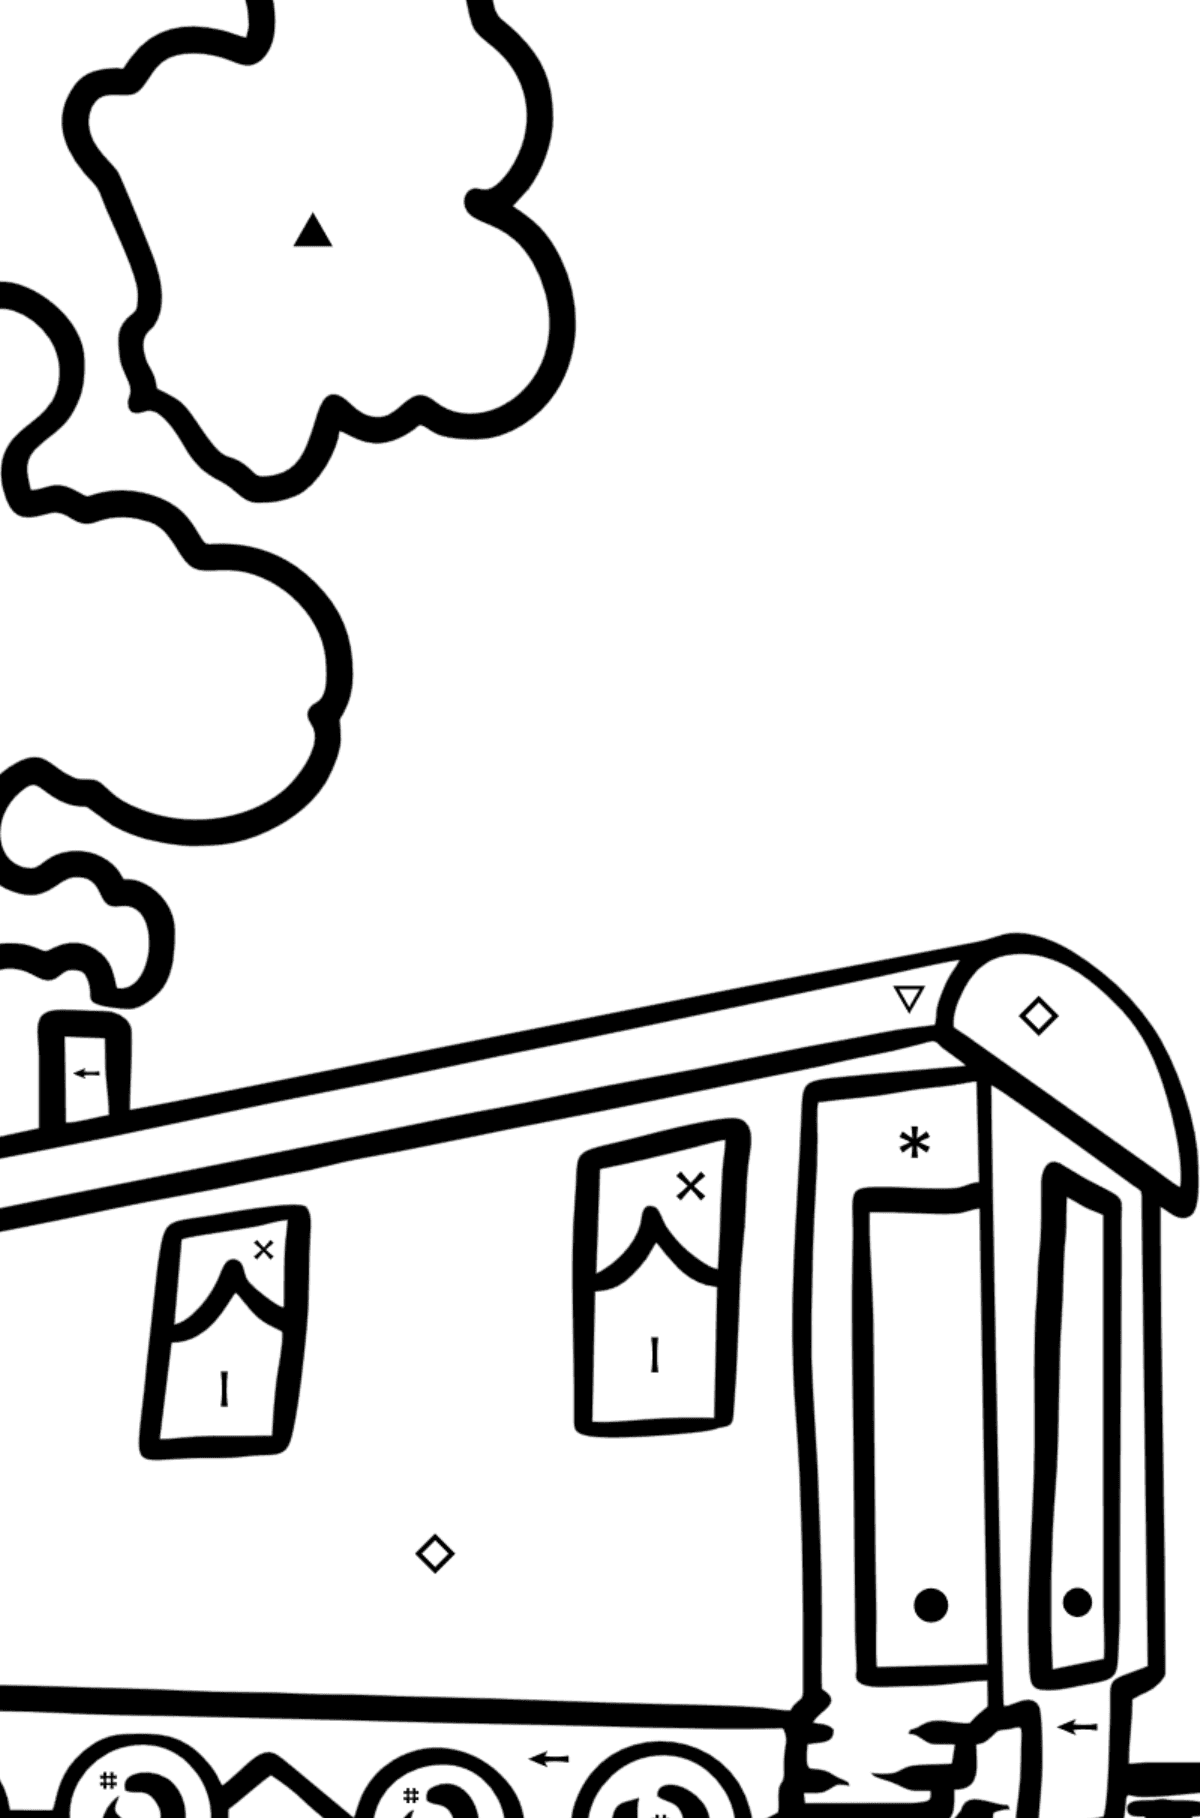 Railway coloring page - Coloring by Symbols for Kids